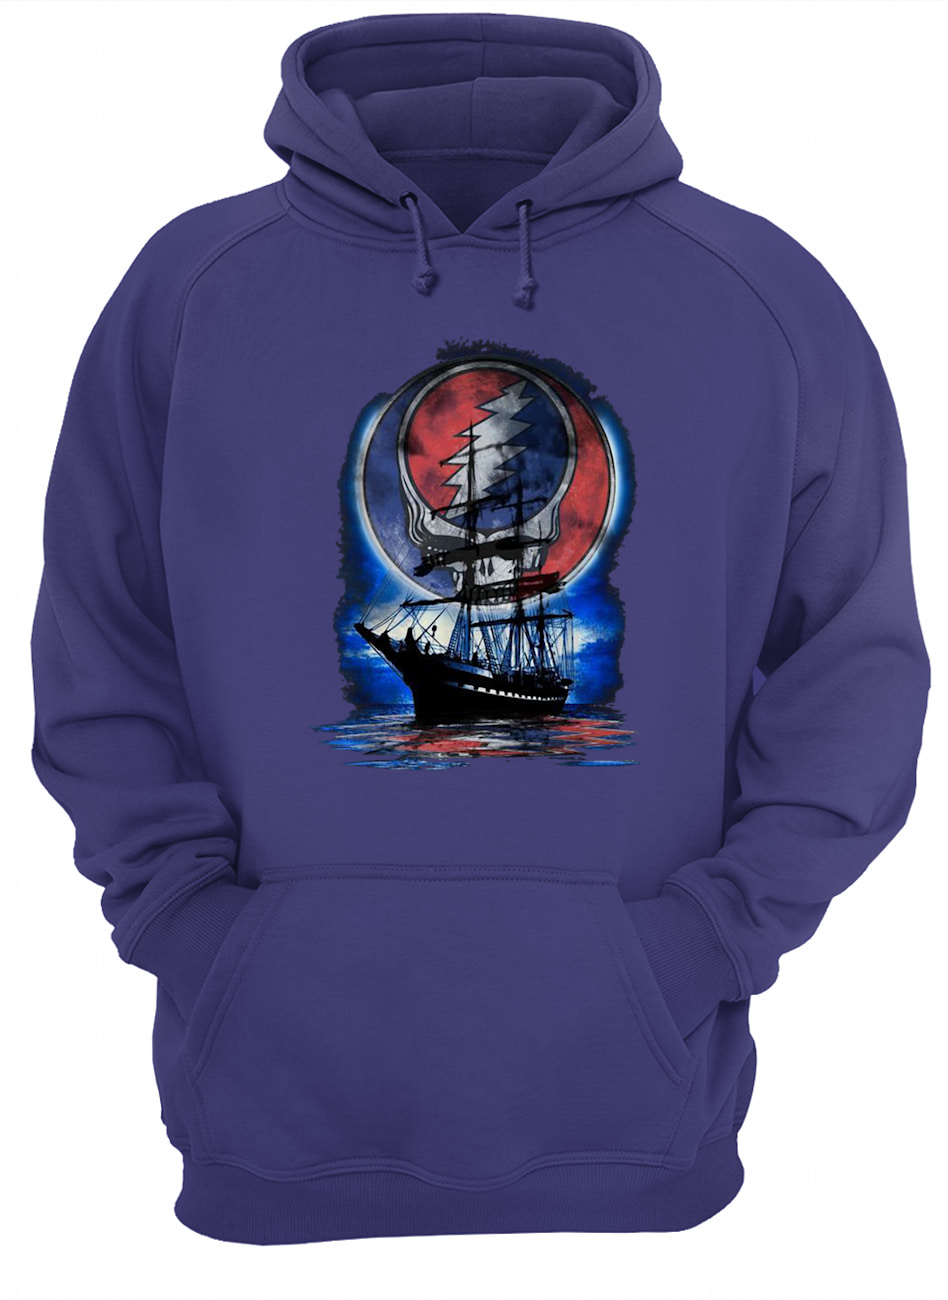 Steal your face moon boat live beyond limits quote relaxing hoodie